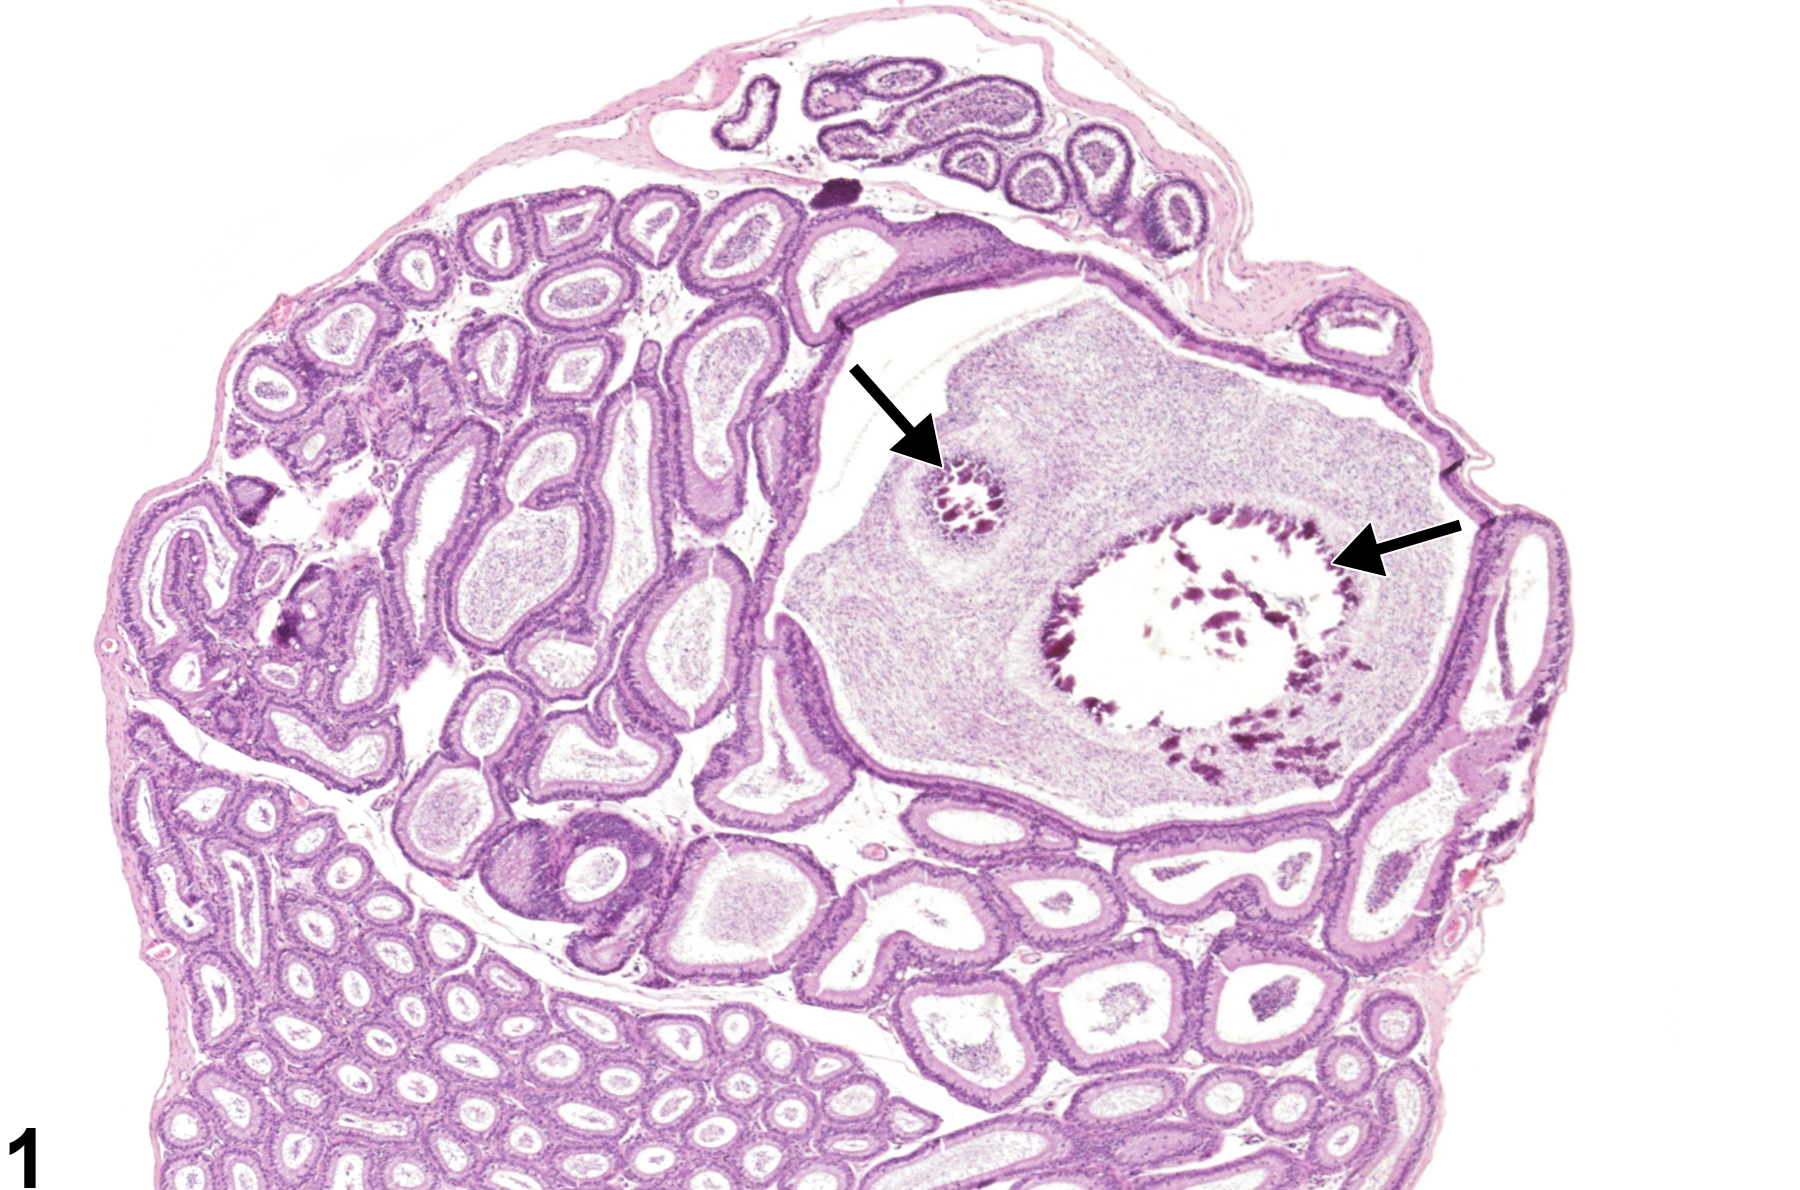 Image of spermatocele in the epididymis from a male B6C3F1 mouse in a subchronic study